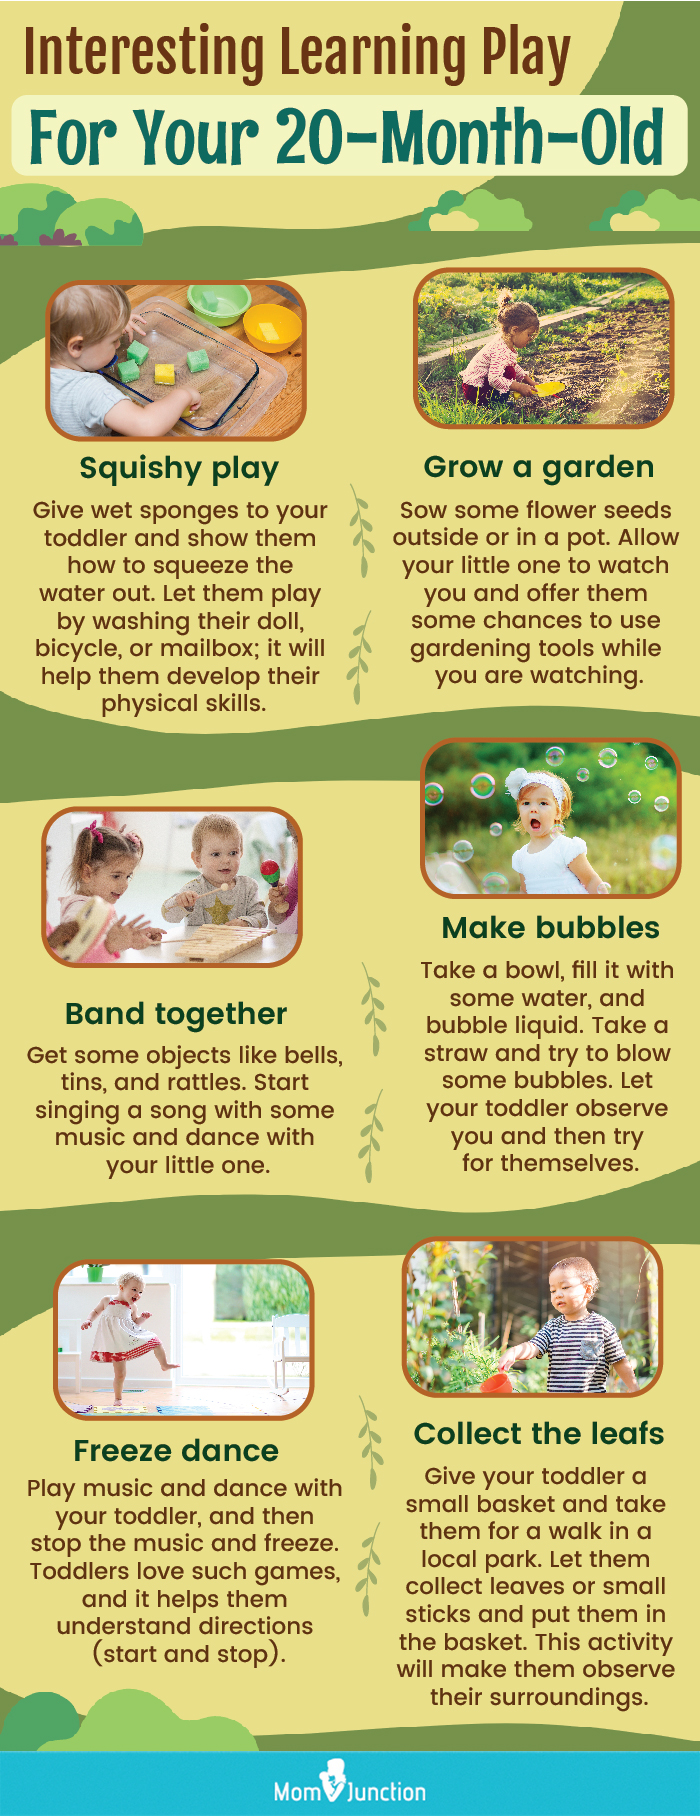 activities for 20 months old baby (infographic)